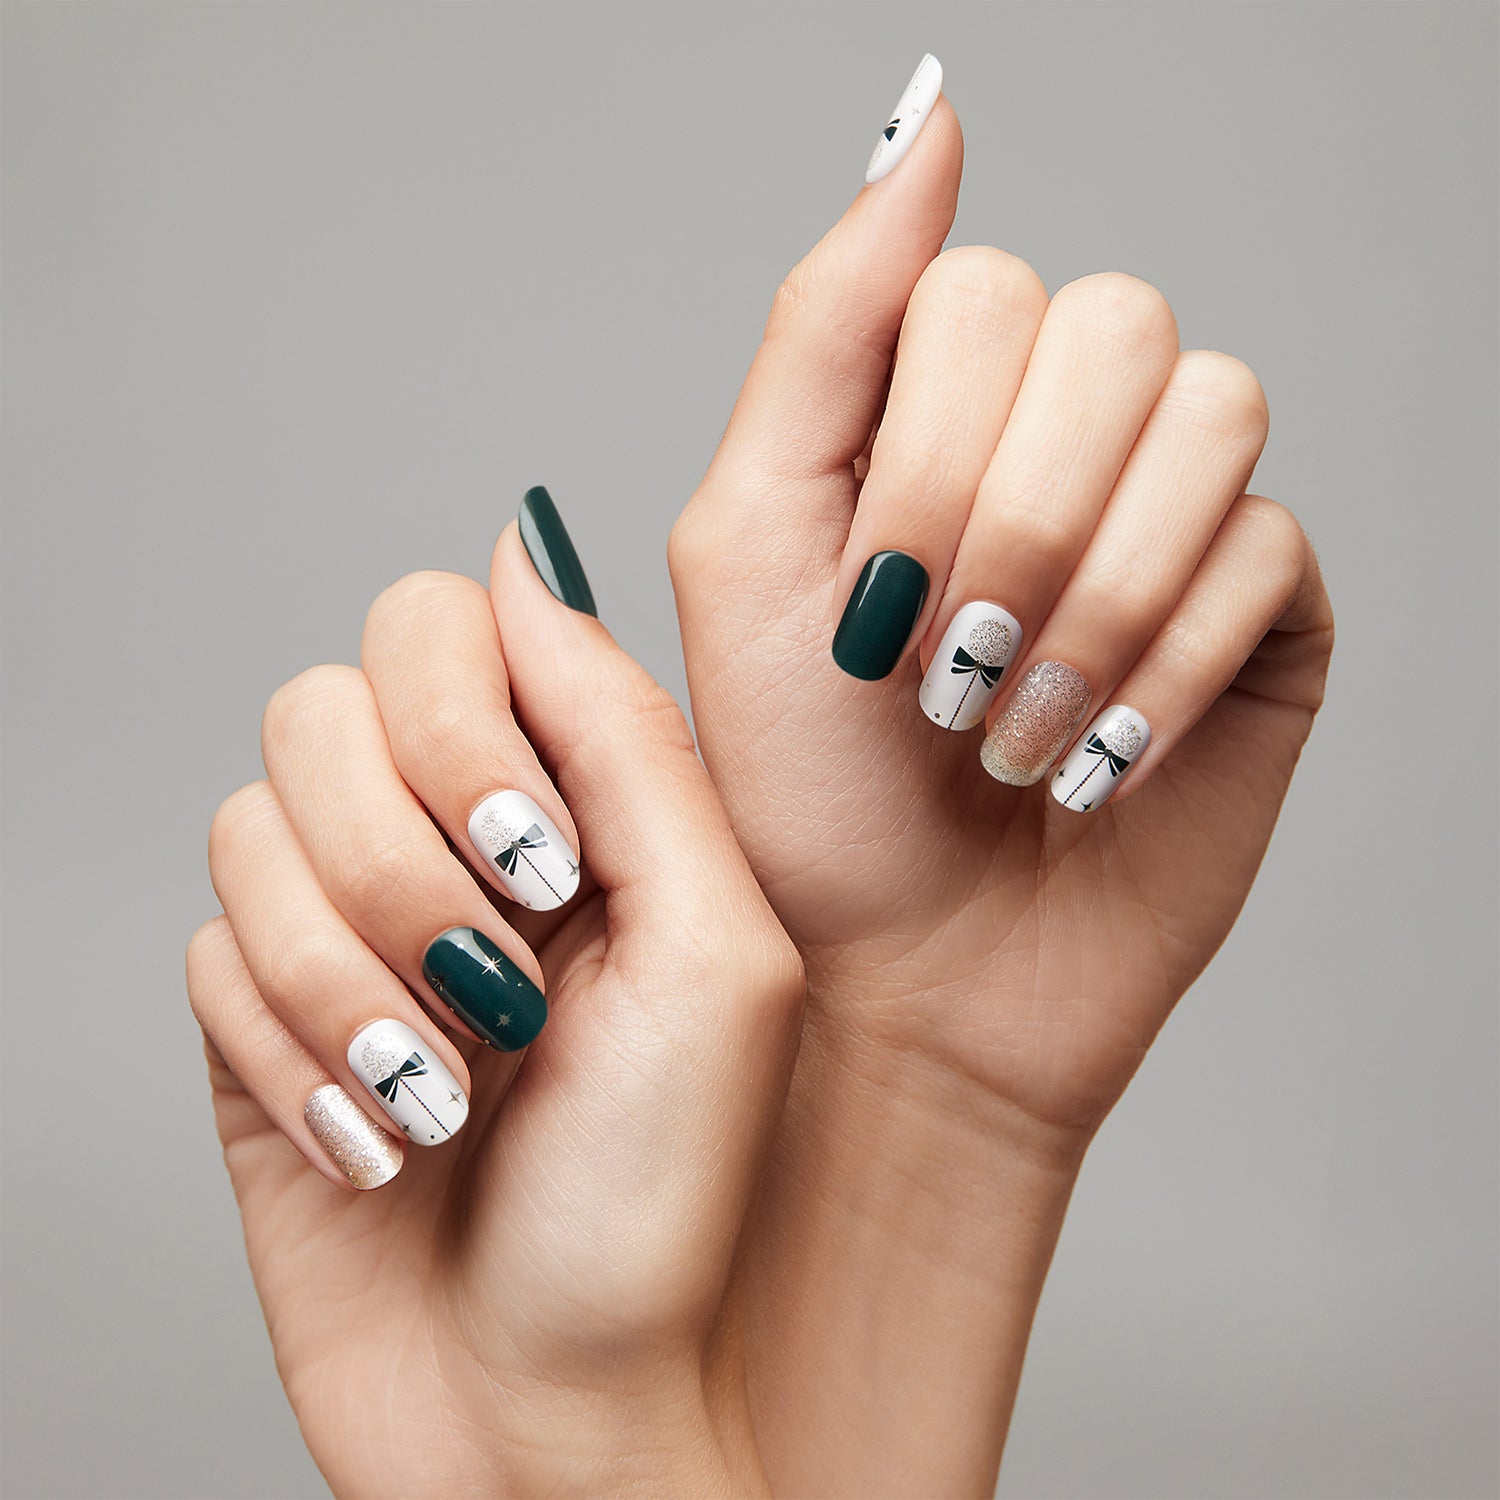 12 Brilliant Foil Nail Designs to Try This Weekend